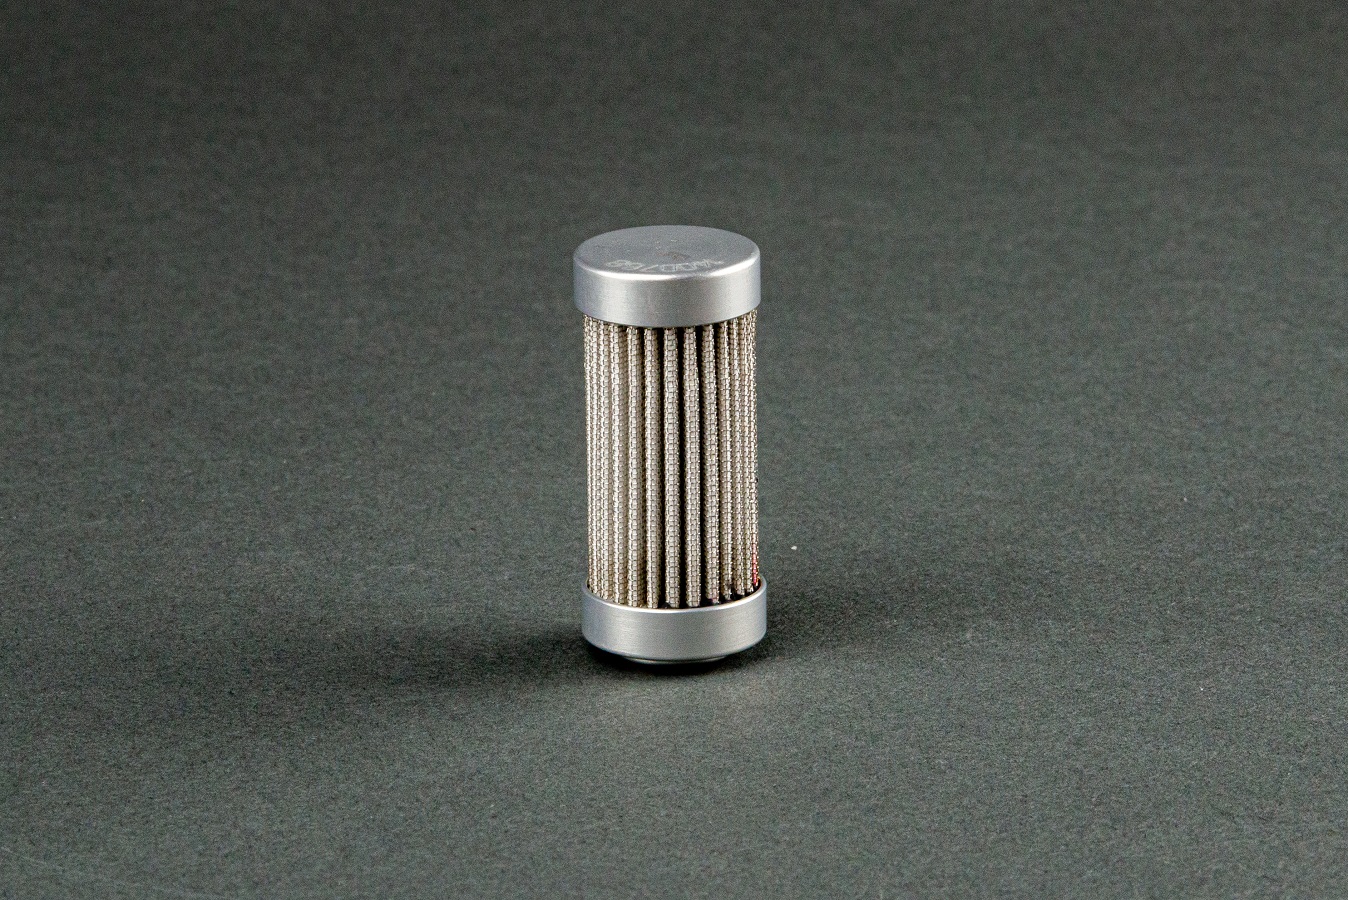 41 Series Mini Tee-Type Filters: 10,000 PSI and flows up to 1.5 GPM